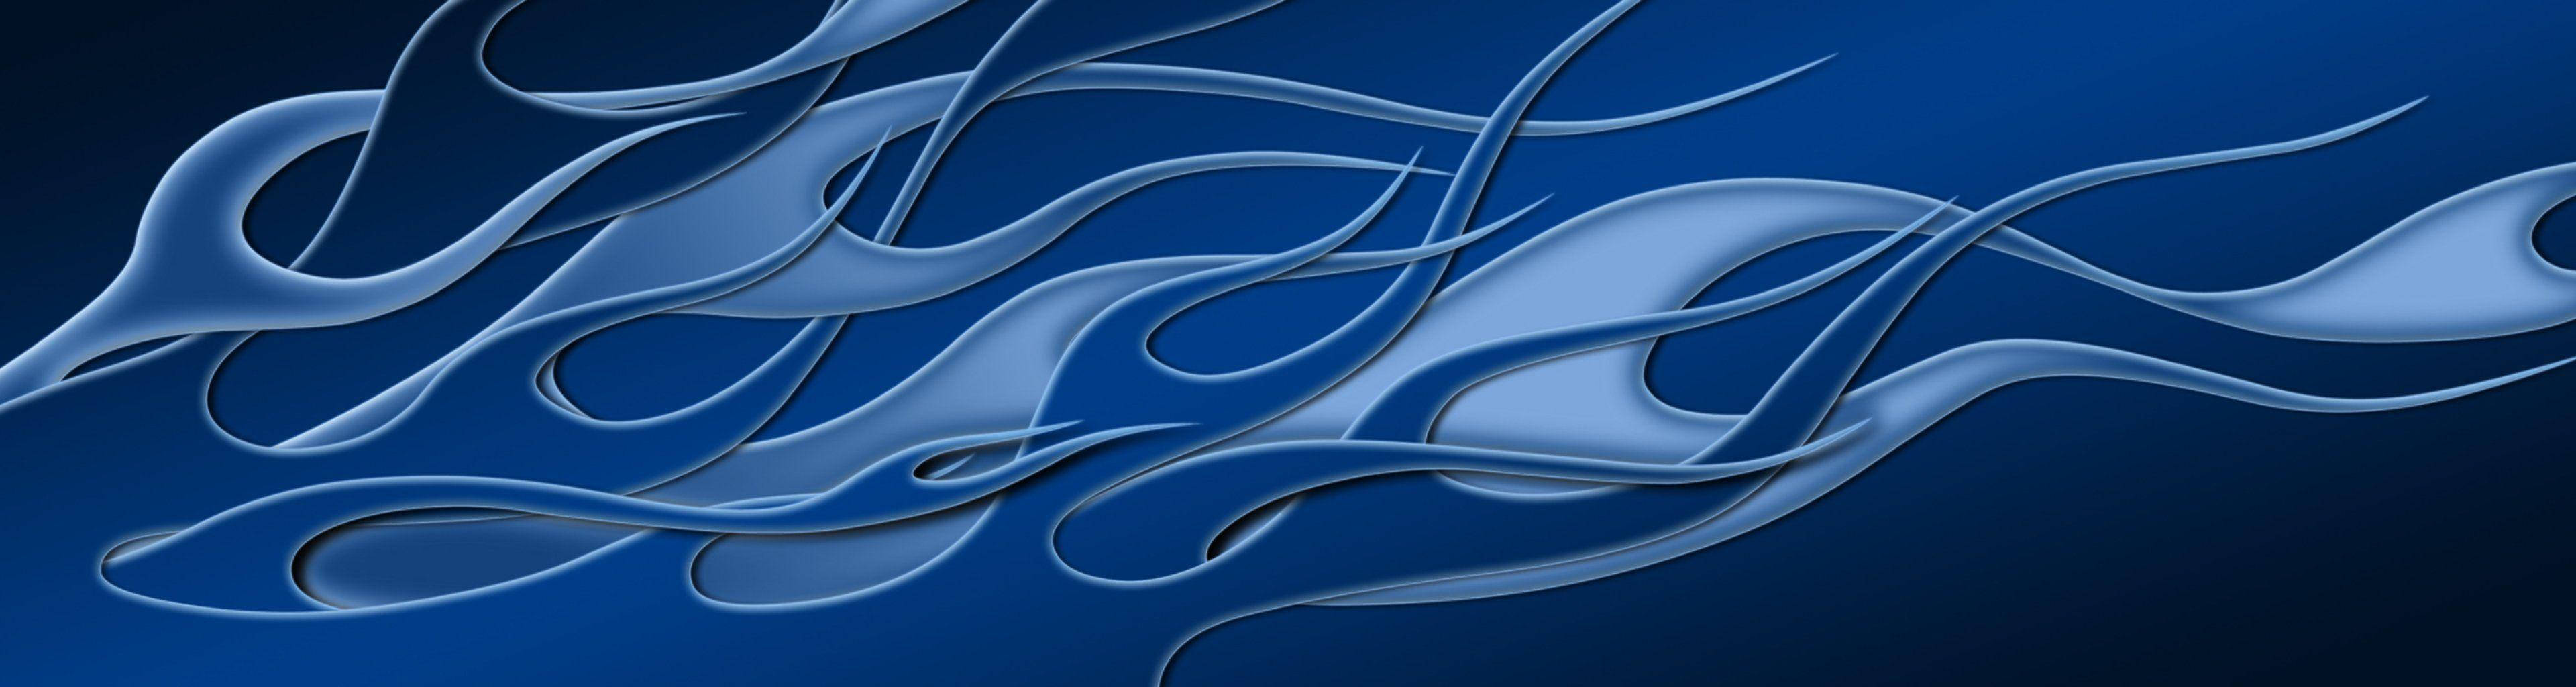 Tribal Blue Flames Background